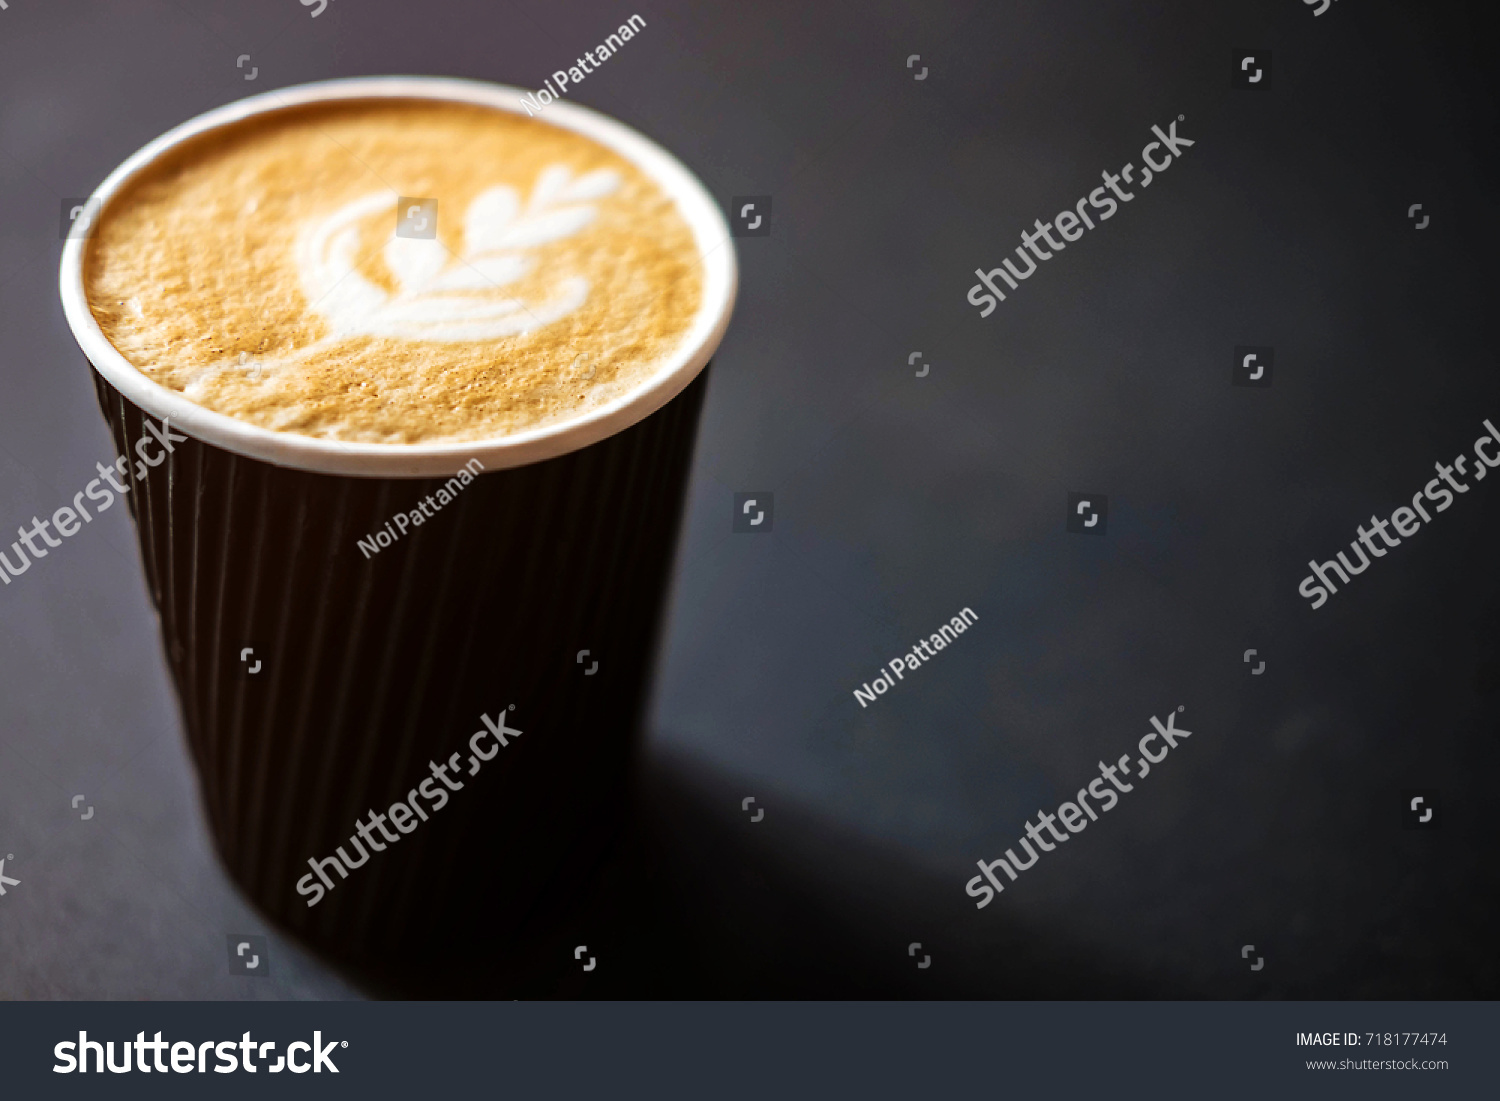 Soft focus of Latte art hot coffee in black paper cup on gray background with shadow , blurred and soft focus image #718177474